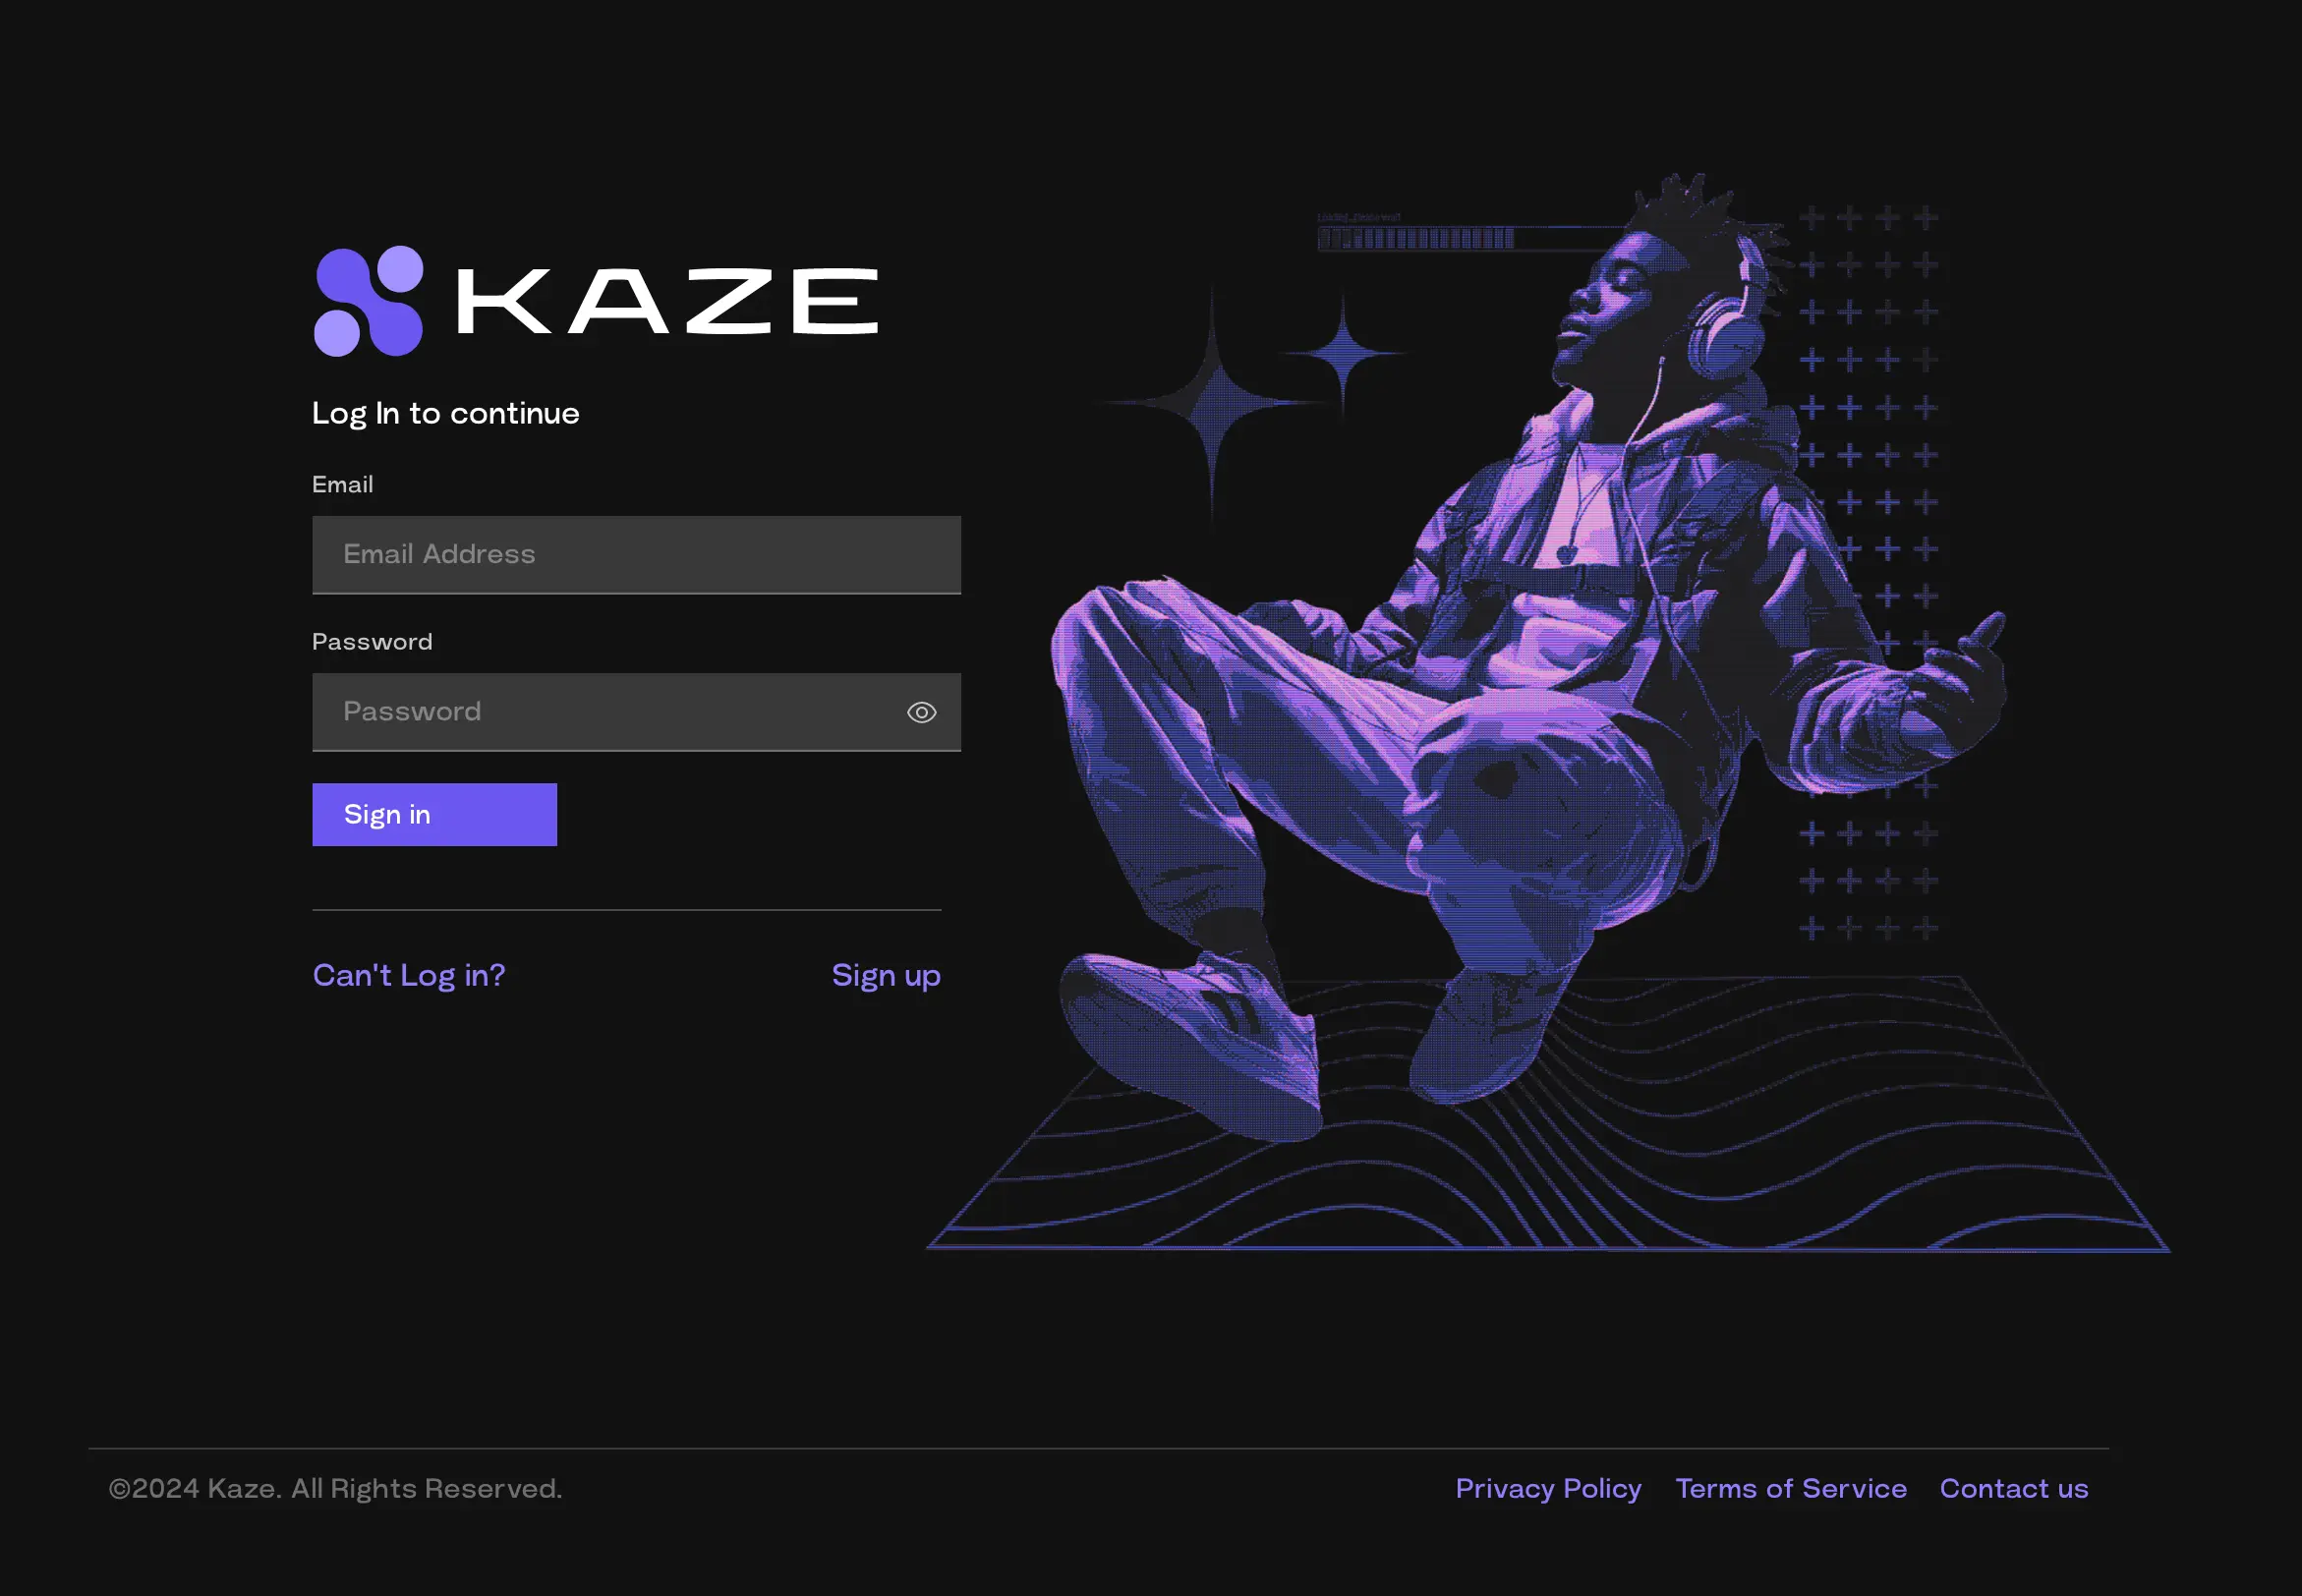 Preview picture of the Kaze.media website, a music distribution network and social media platform for musicians.